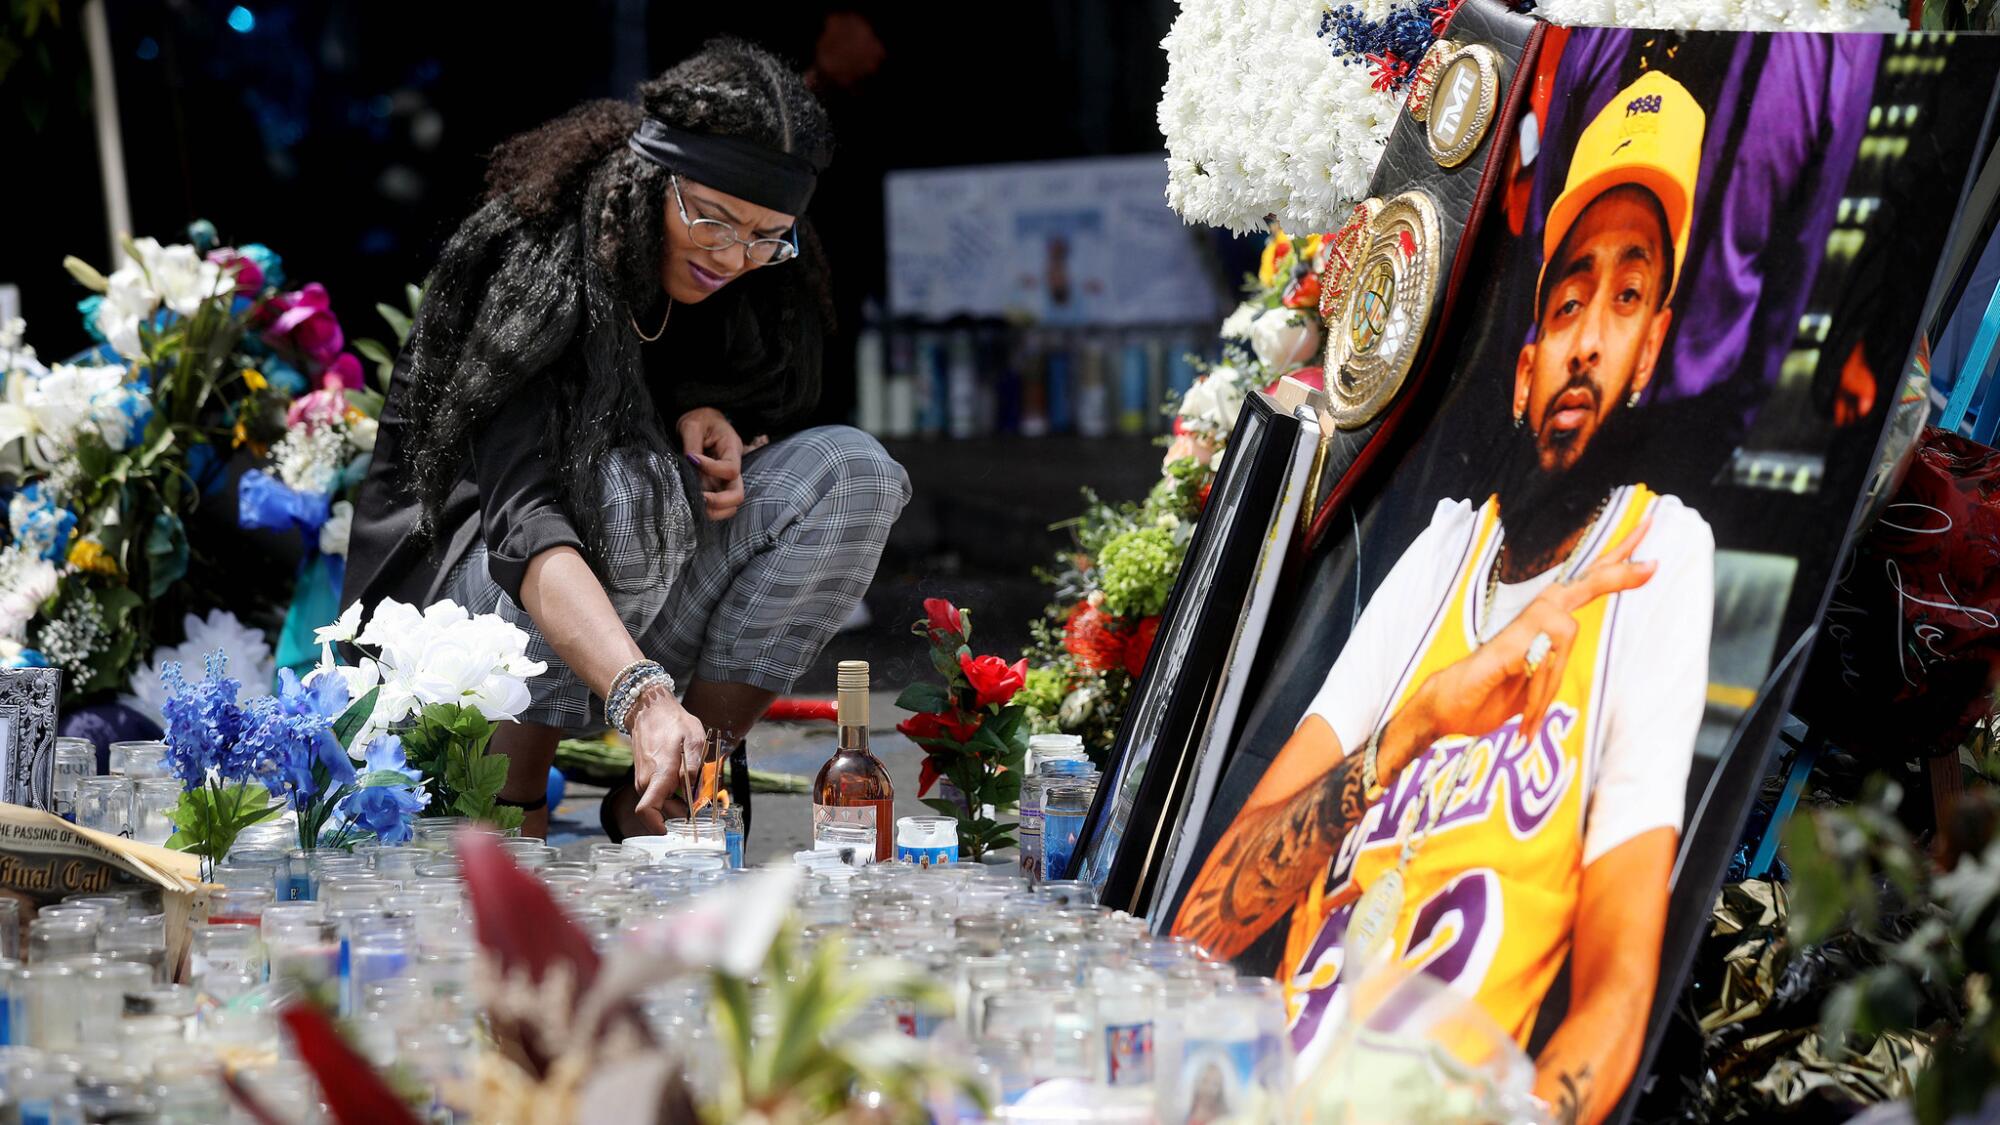 Corina Samarco of Ypsilanti, Mich., lights a candle in the parking lot of the Marathon Clothing Company before the start of the Nipsey Hussle Celebration of Life procession on April 11.